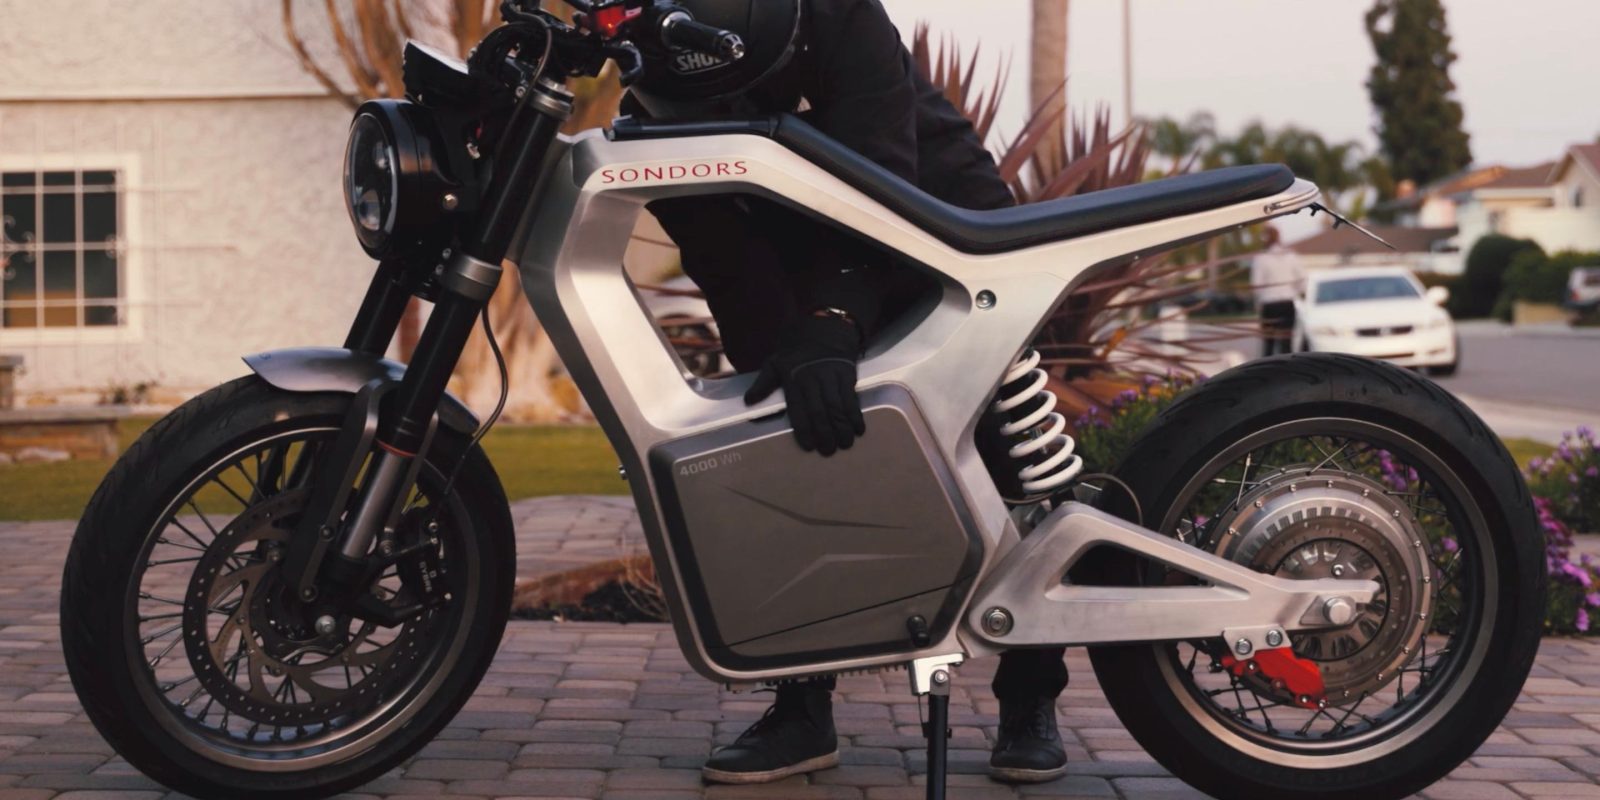 The $5,000 SONDORS electric motorcycle in testing ahead of deliveries